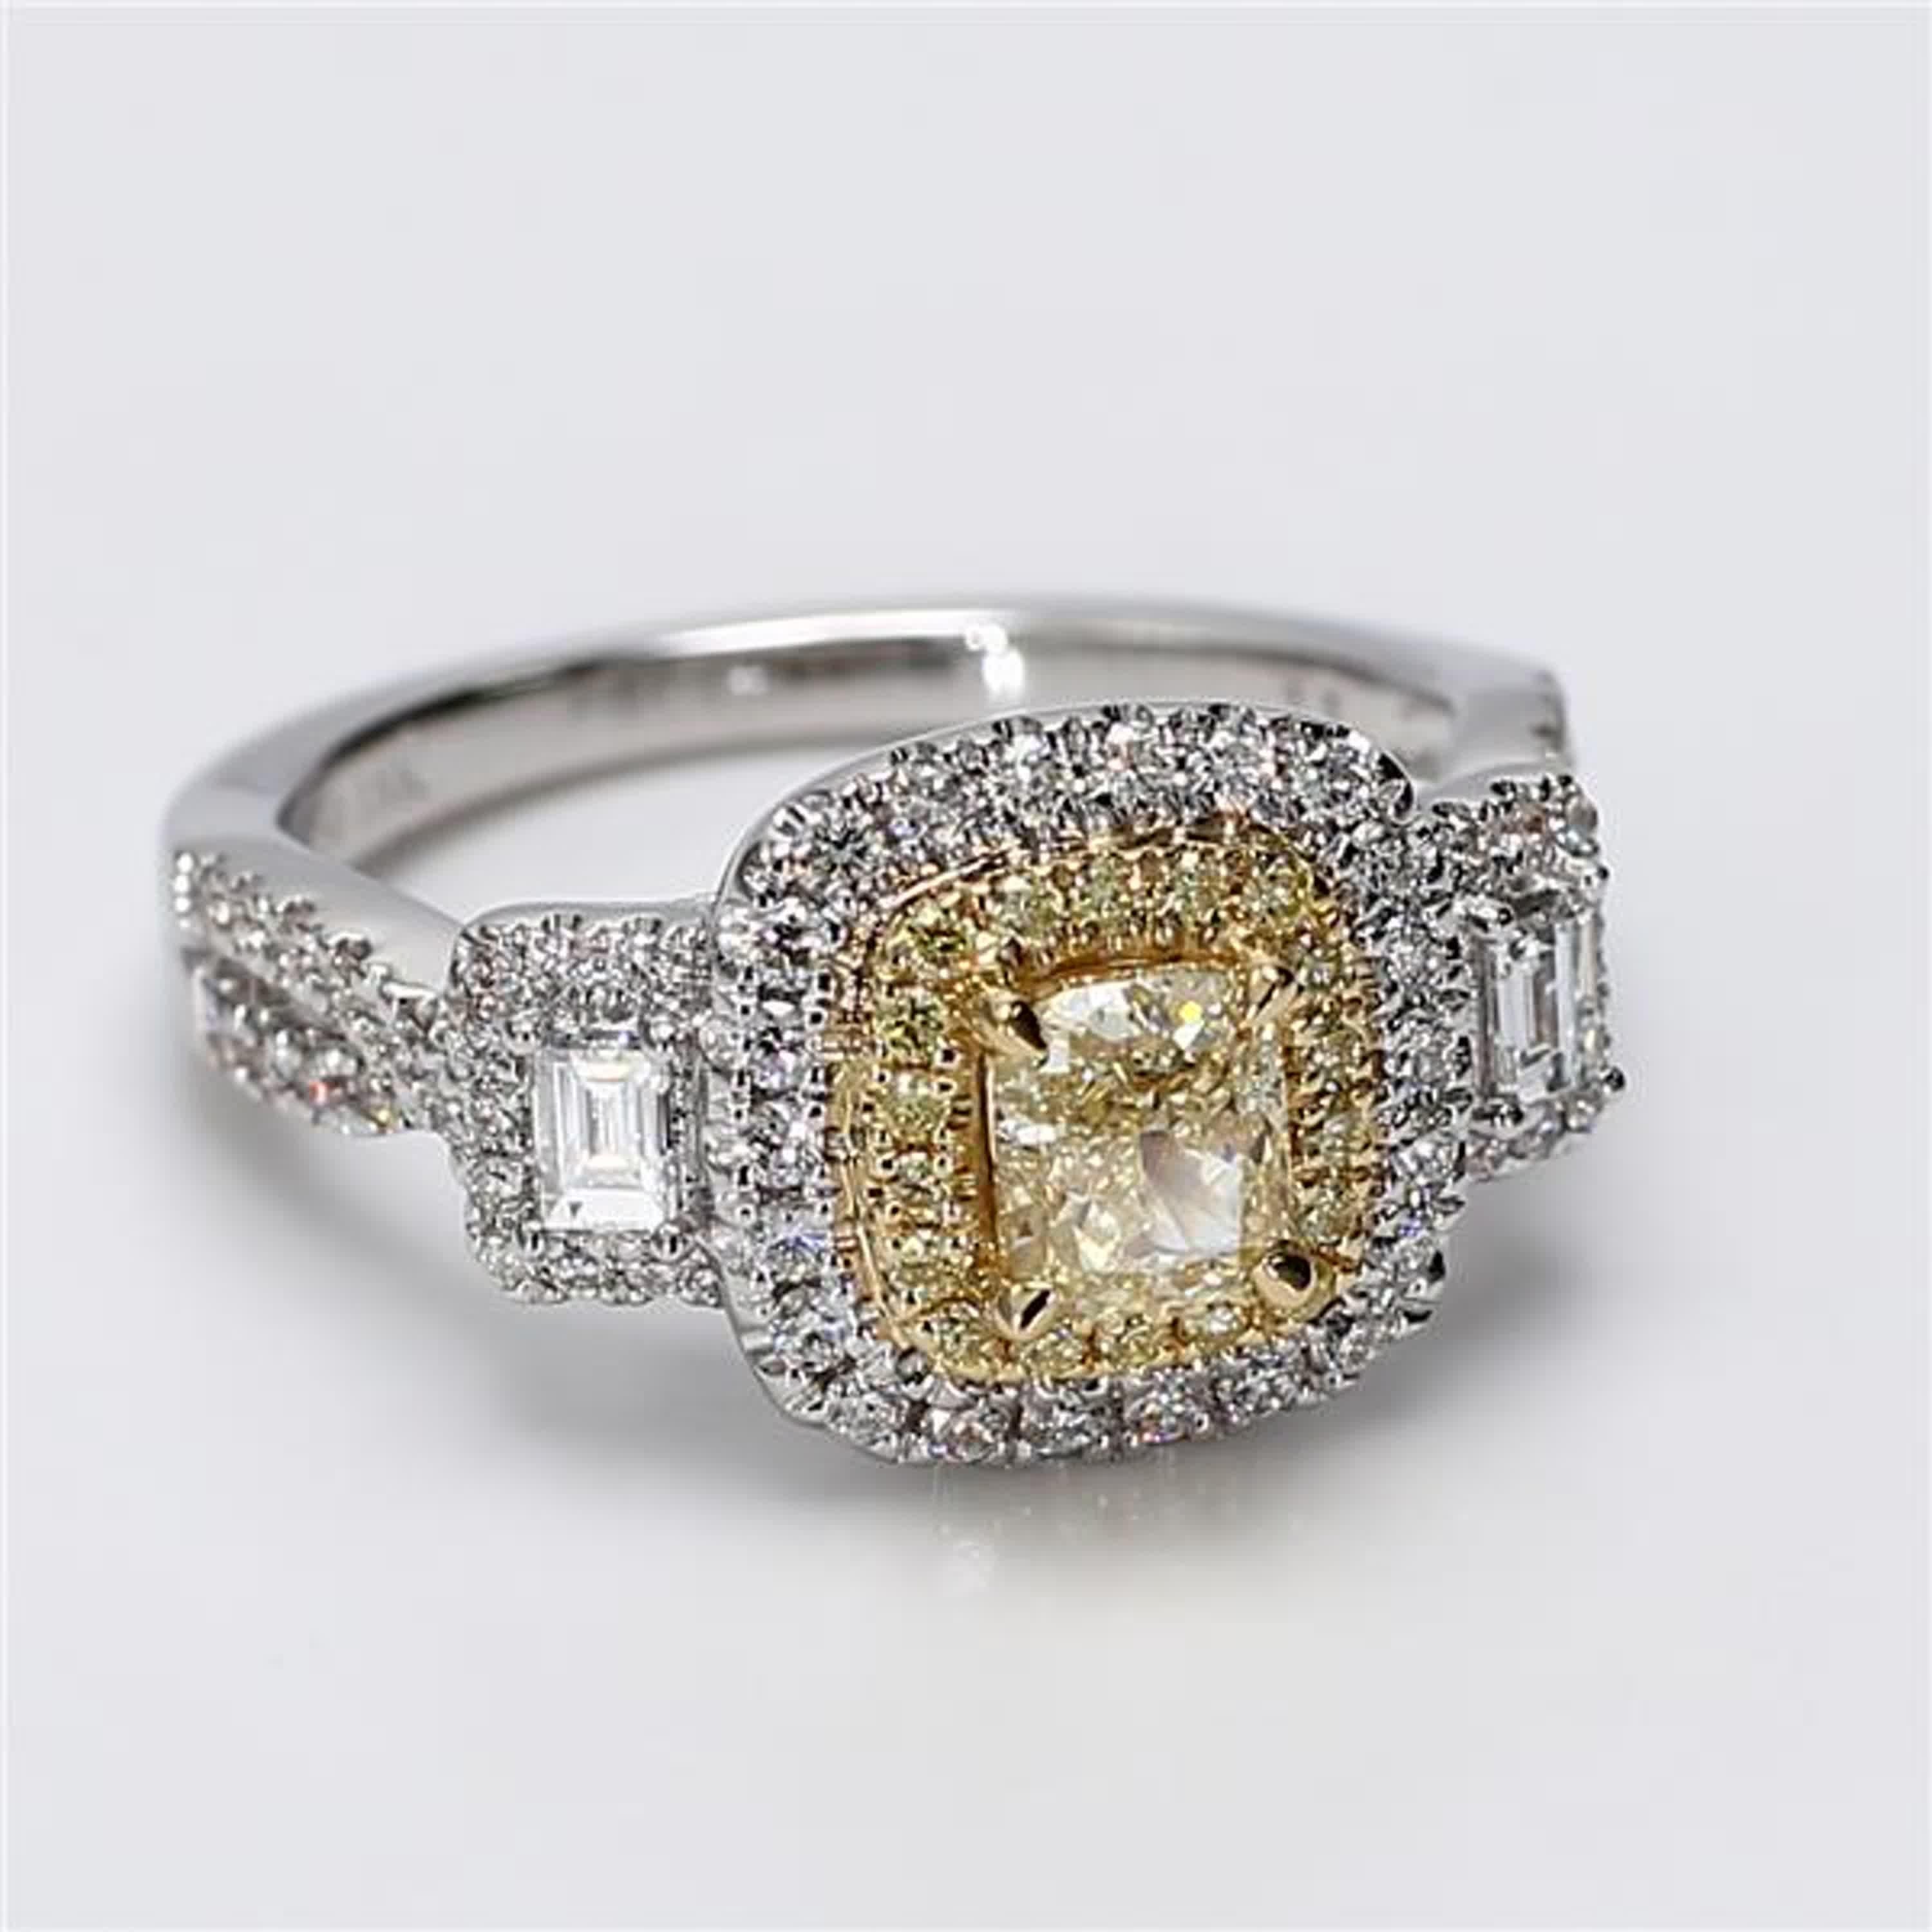 Natural Yellow Cushion and White Diamond 1.36 Carat TW Gold Cocktail Ring For Sale 1